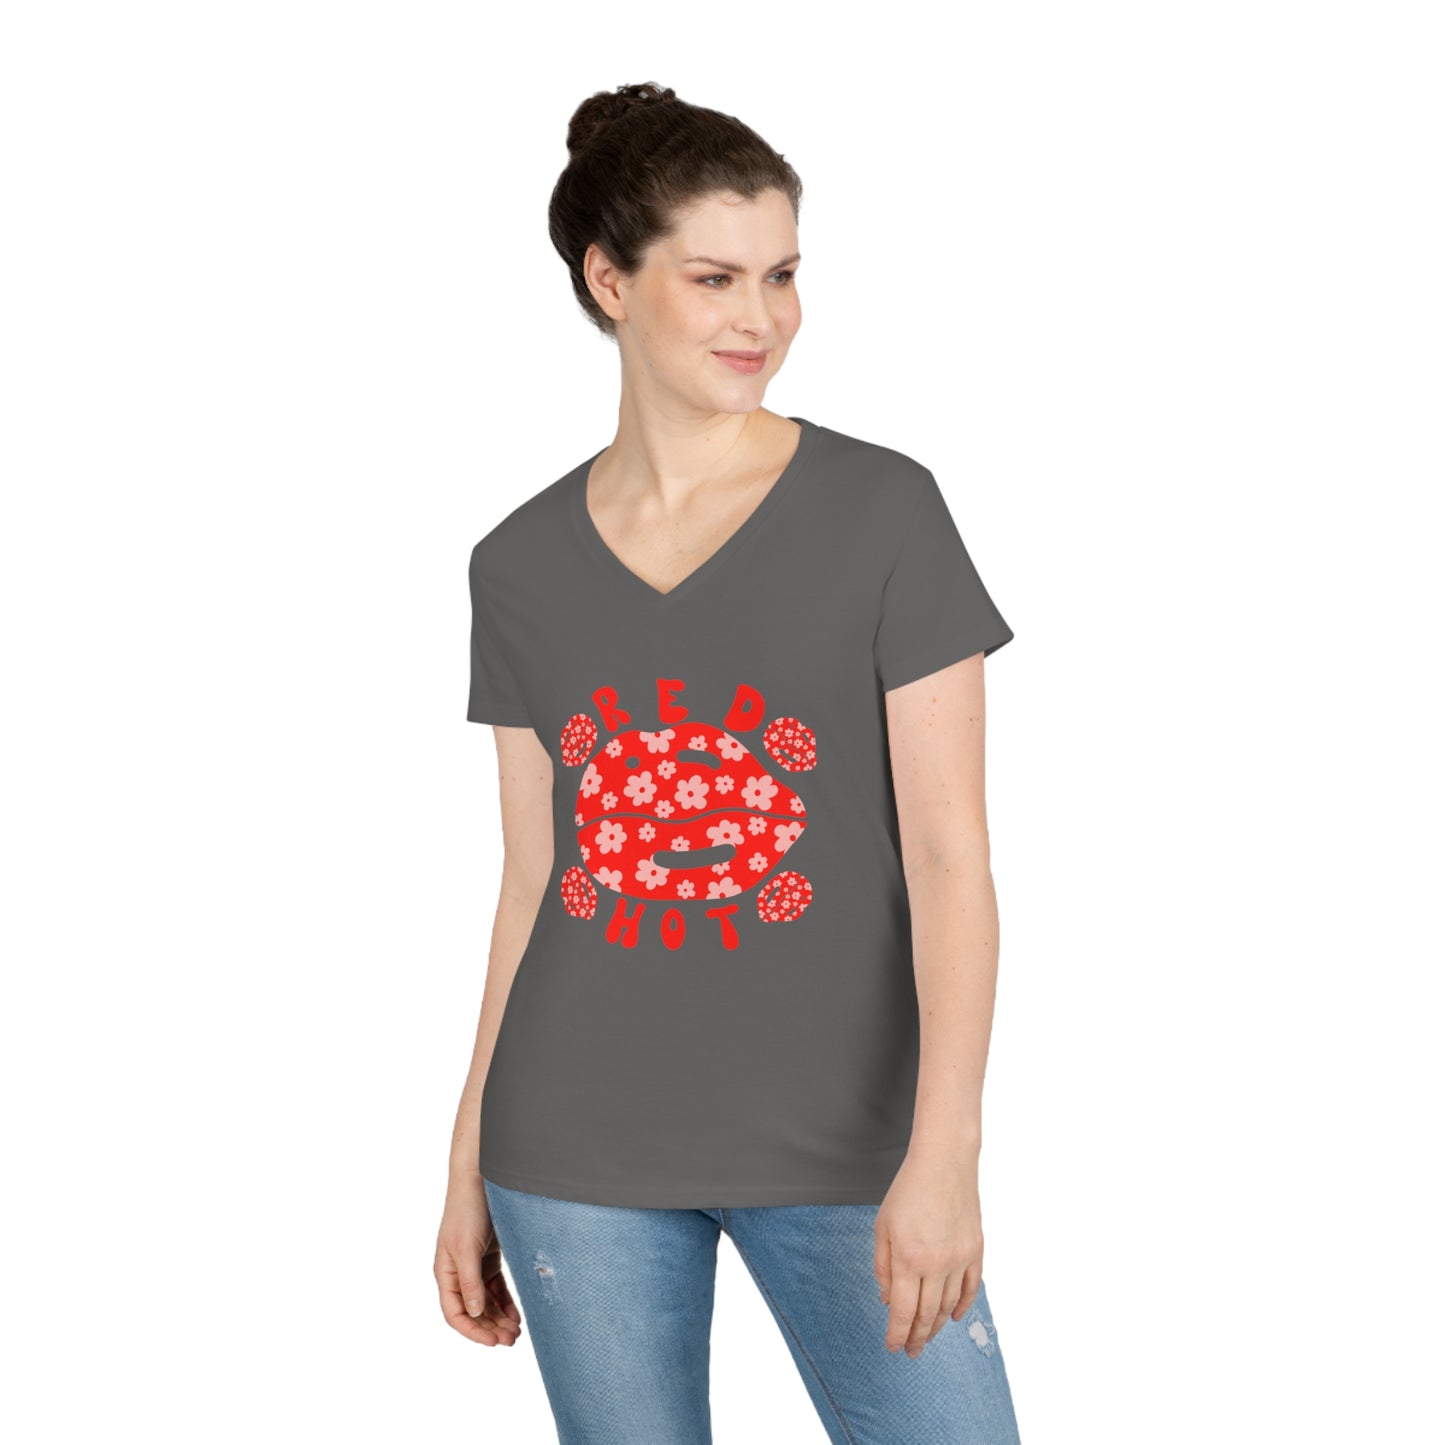 Red Hot Lips Ladies' Cotton V-Neck T-Shirt